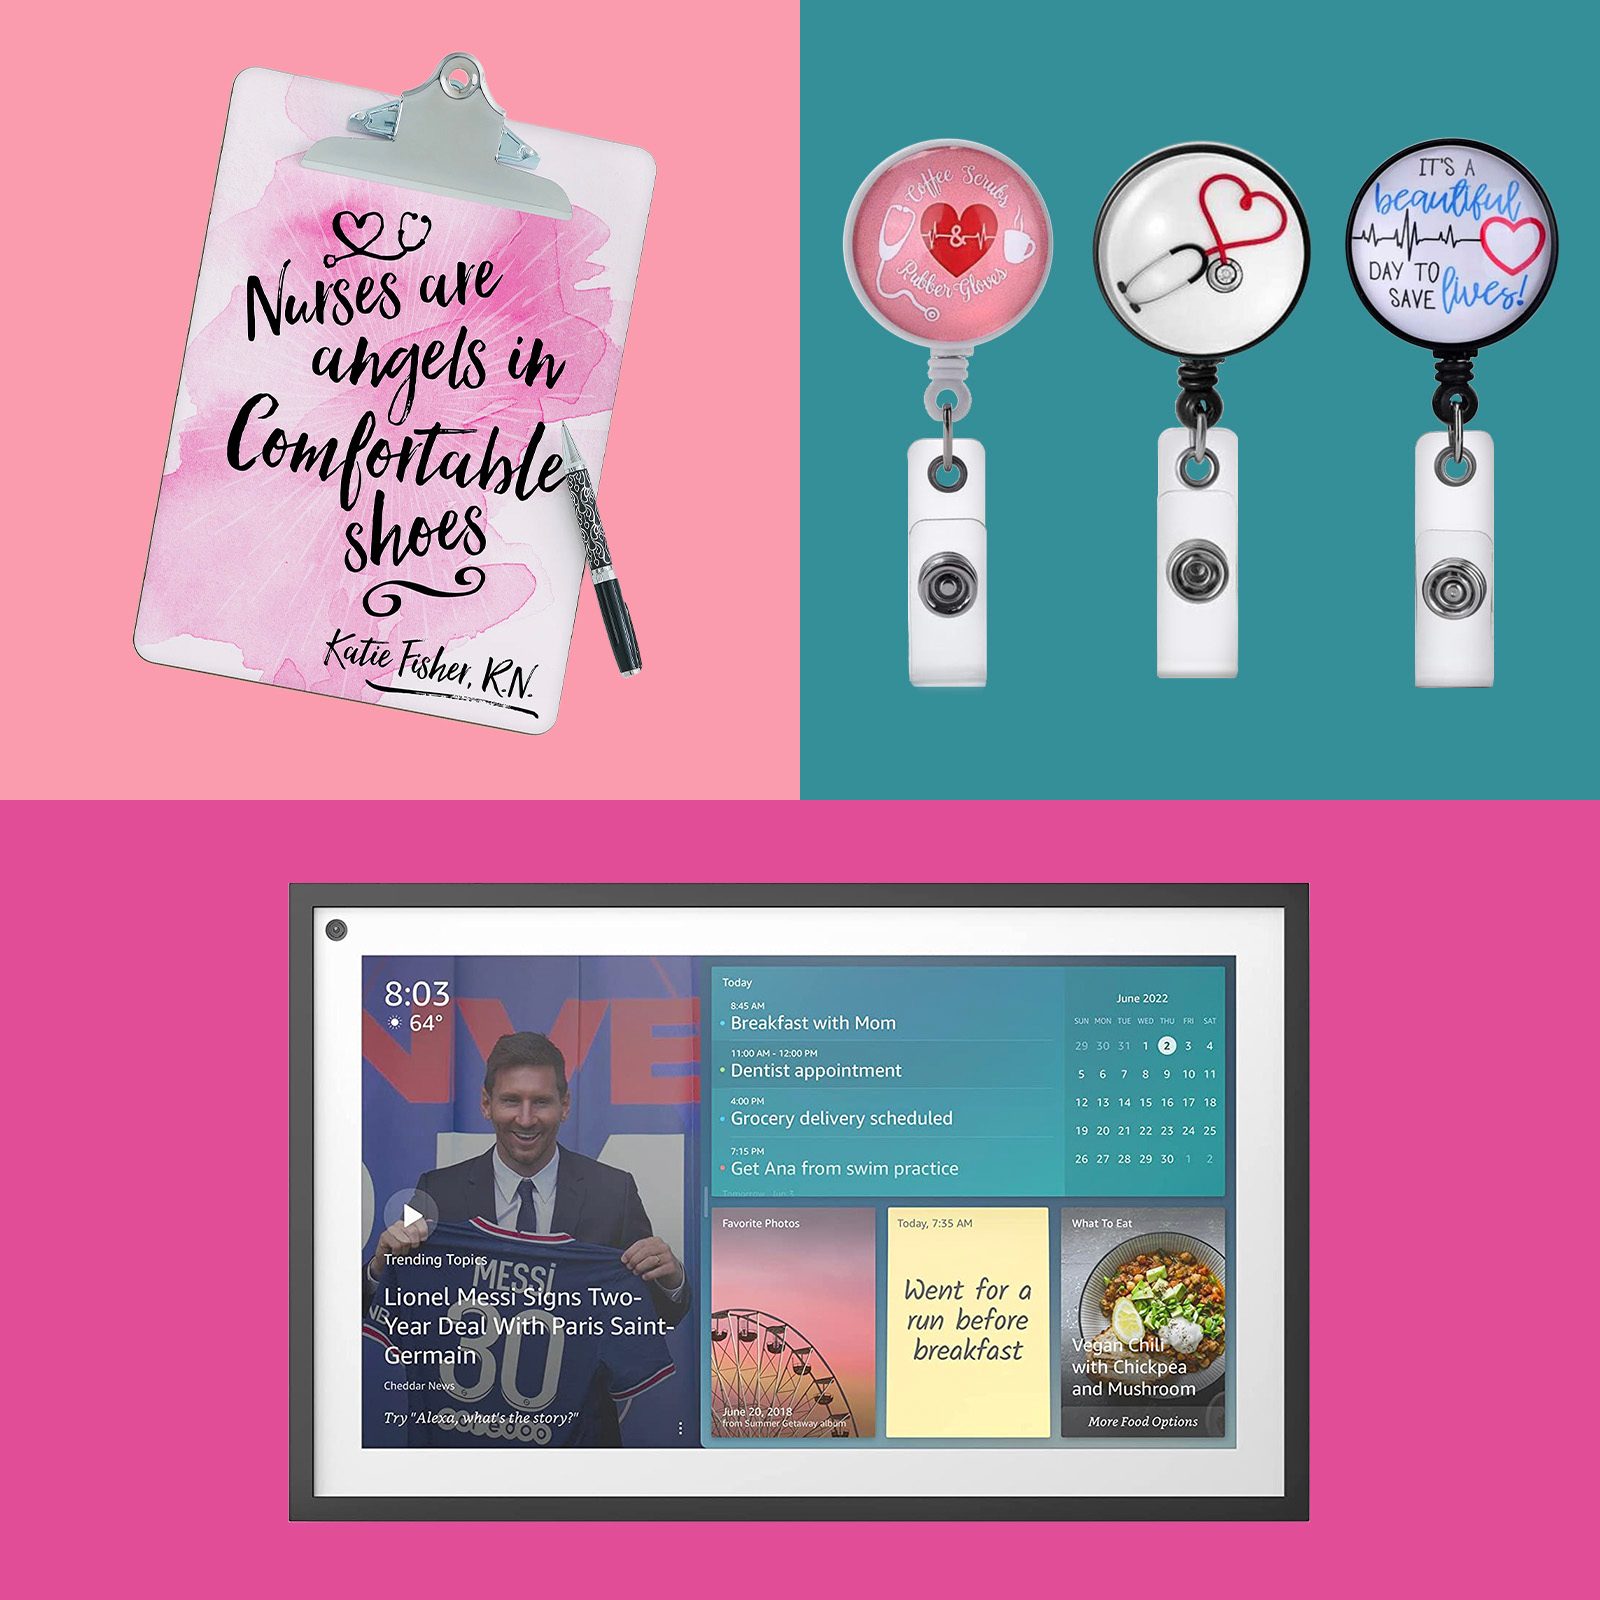 30 Best Gifts for Nurses to Show How Much You Care